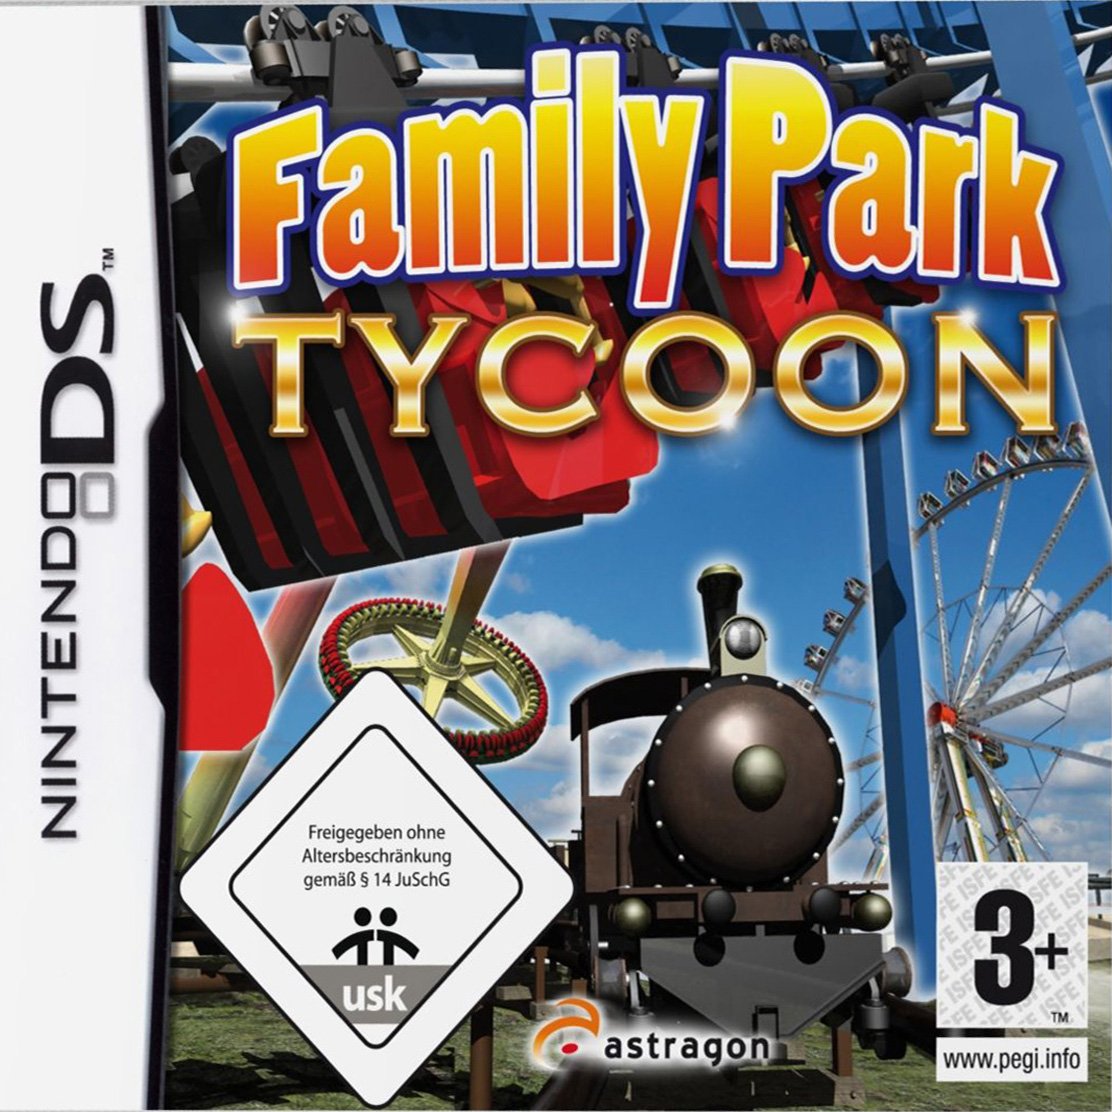 The coverart image of Family Park Tycoon